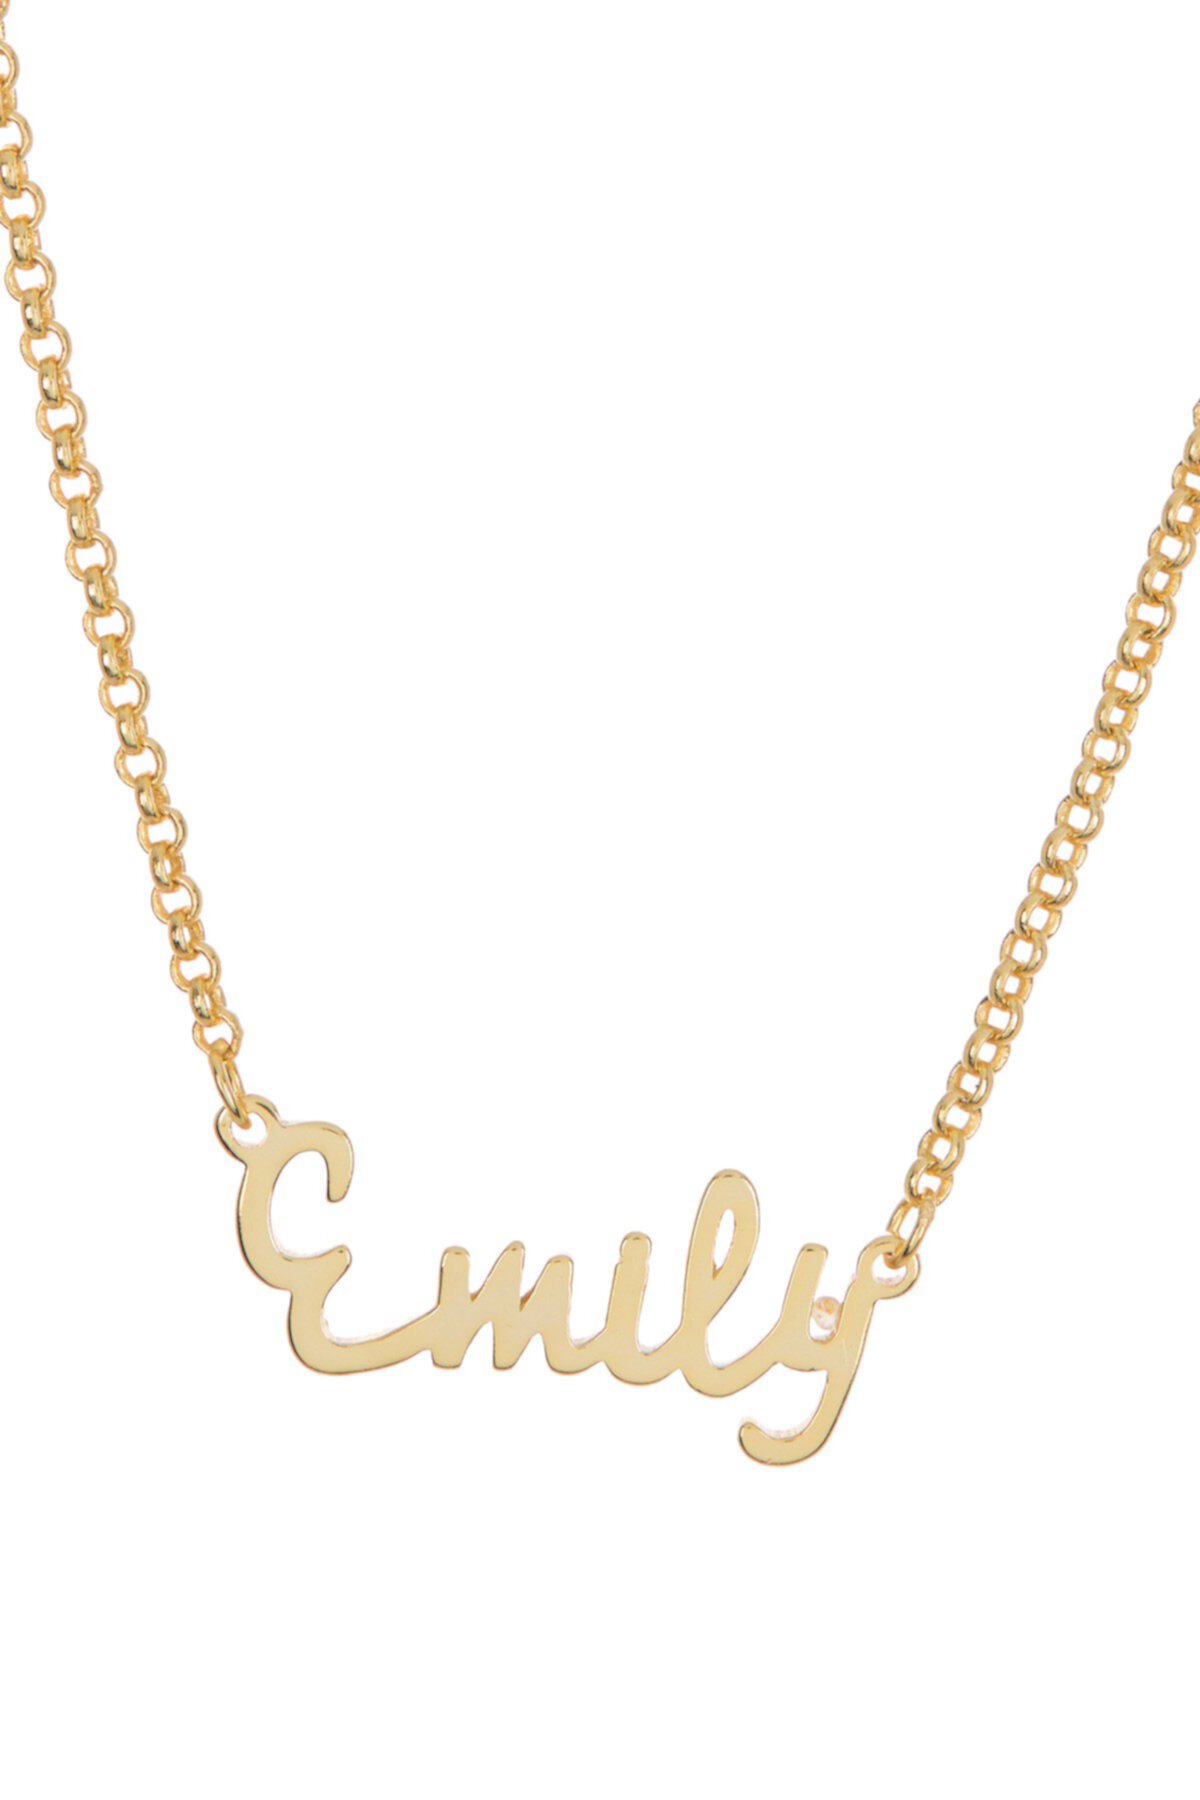 18K Yellow Gold Plated Sterling Silver 'Emily' Name Pendant Necklace Argento Vivo